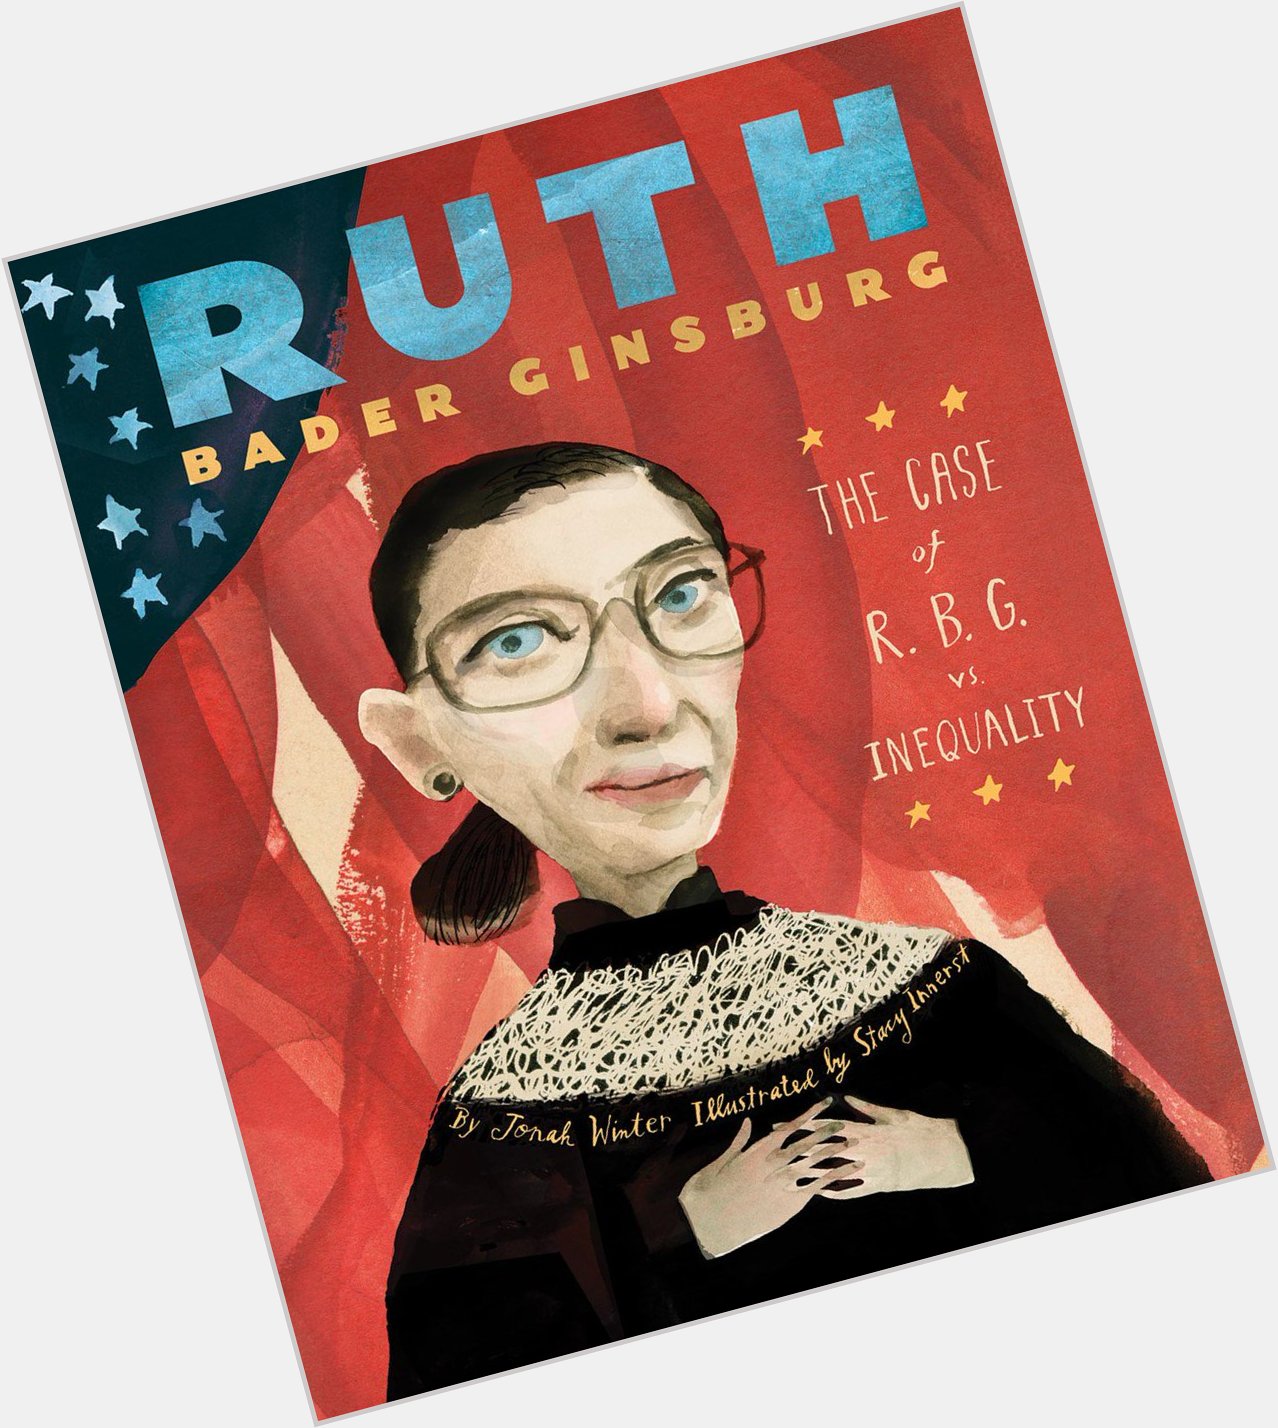 Happy book birthday to Ruth Bader Ginsburg : The Case of R.B.G. vs. Inequality! 